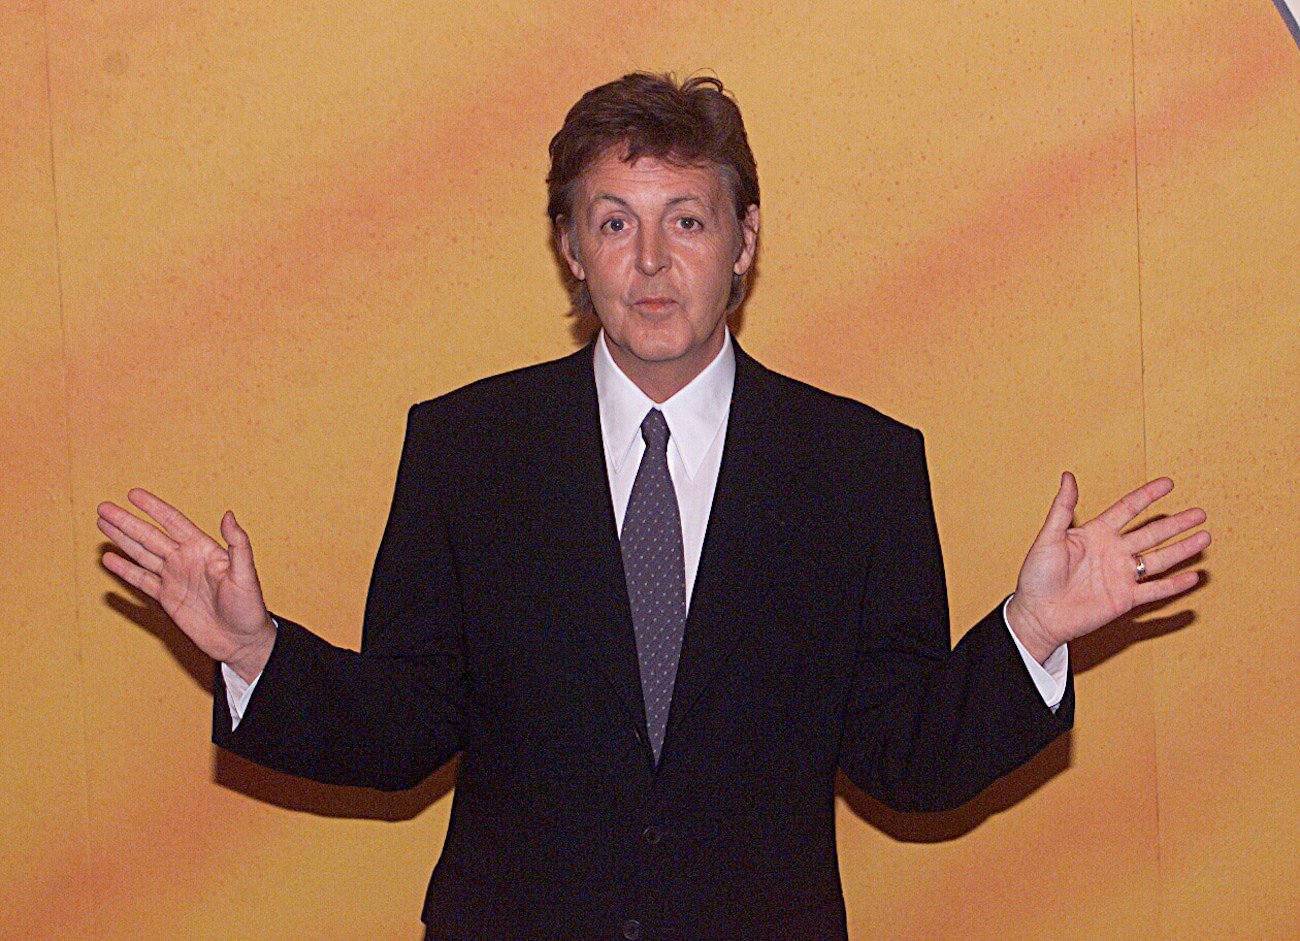 Paul McCartney at a press conference for 'Say No to GMO' in 1999.